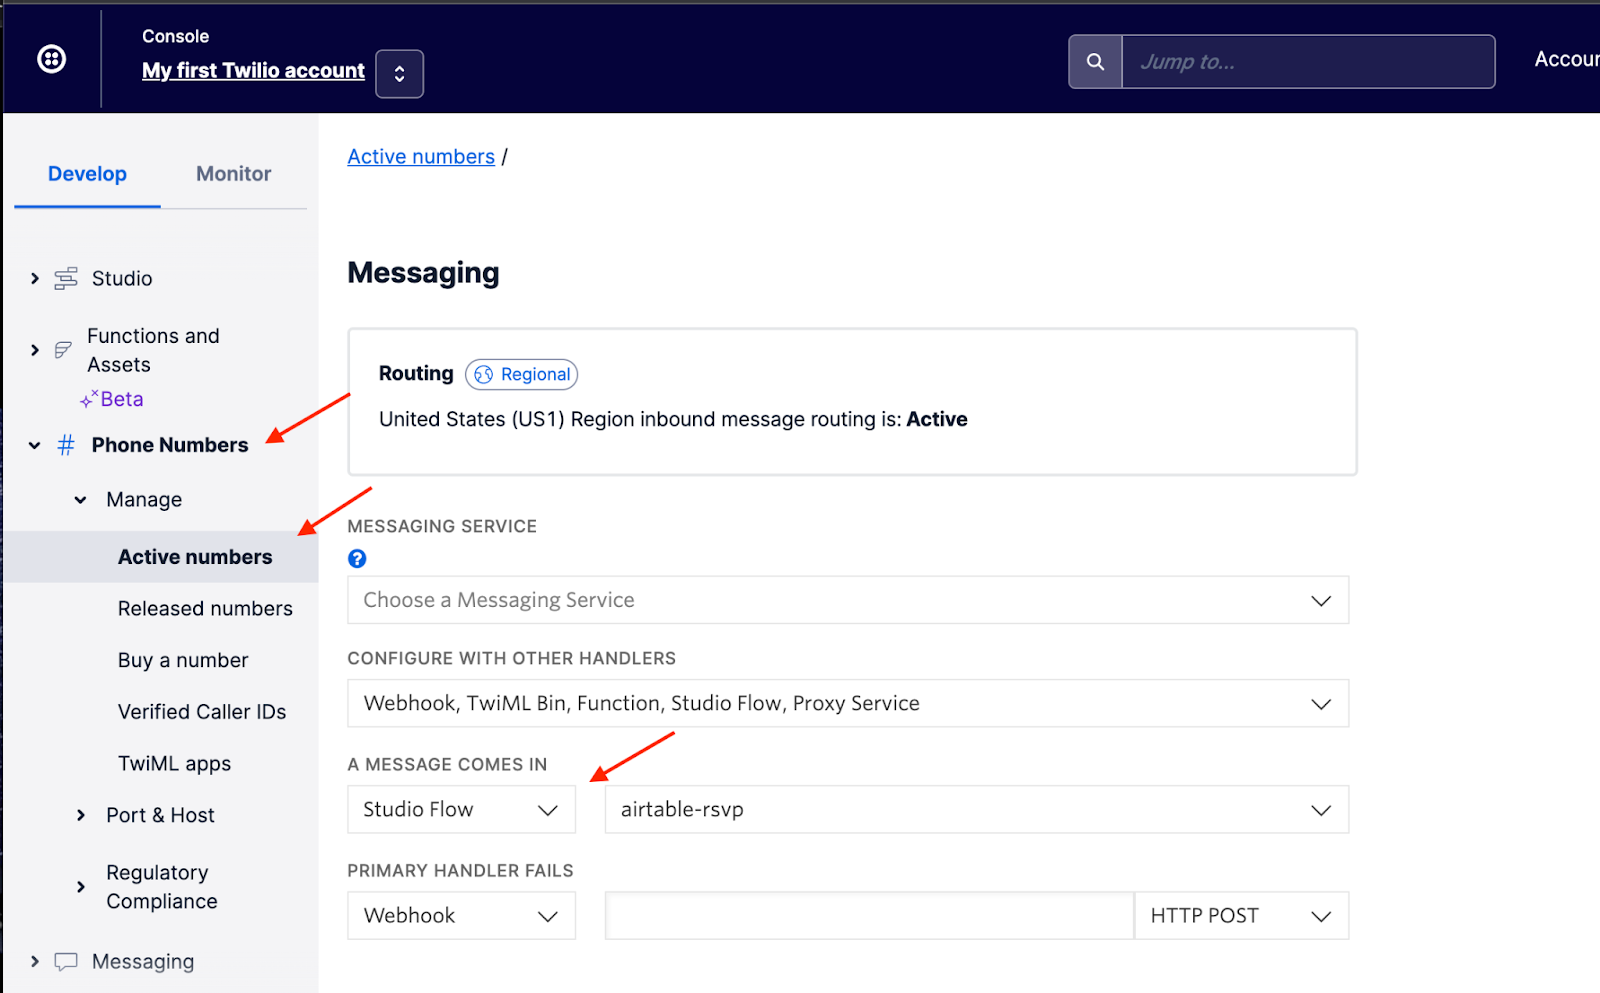 Screenshot of where to change how a Twilio number responds to an incoming message to the RSVP studio flow